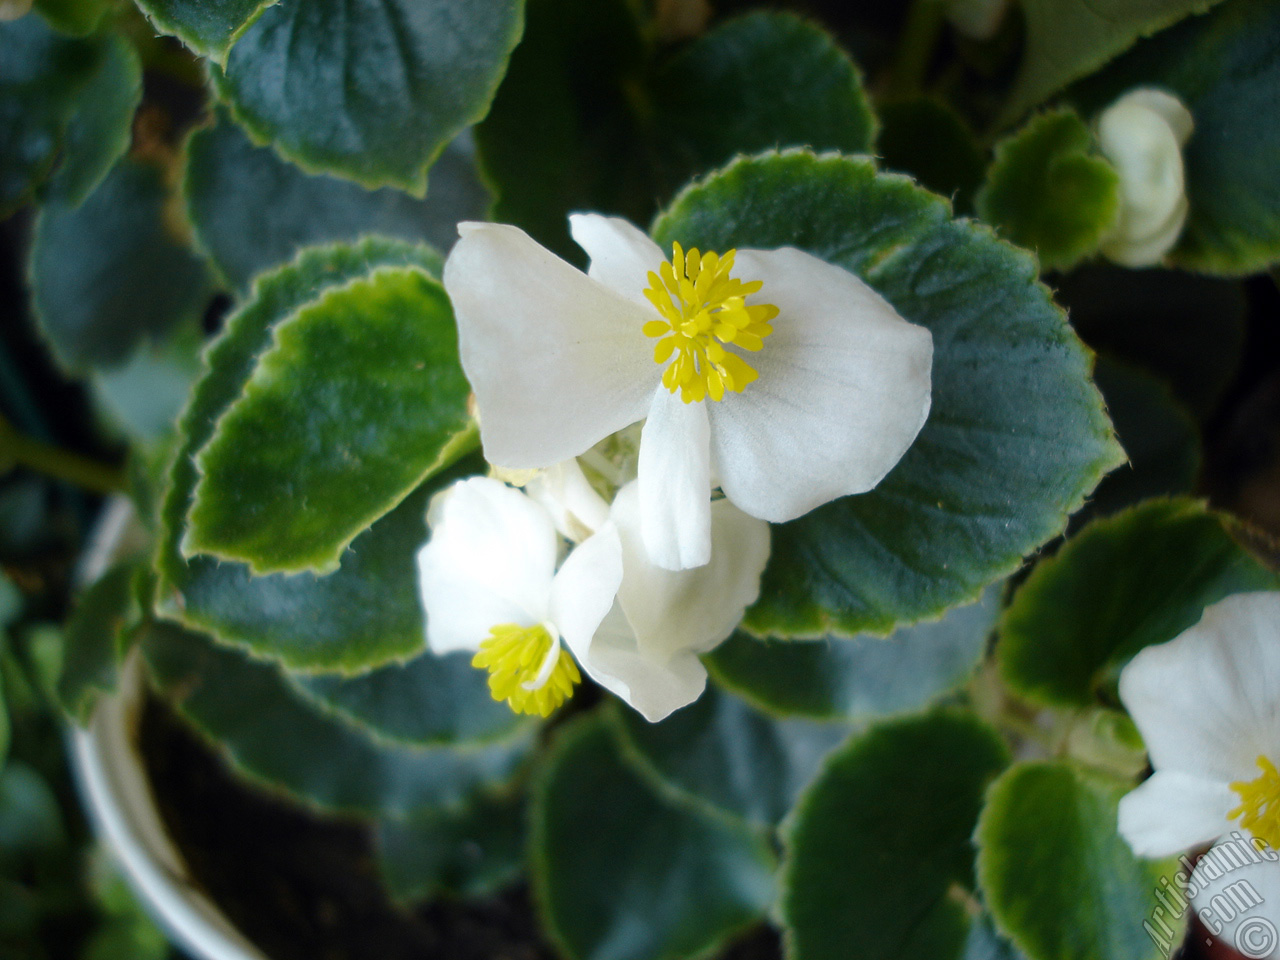 Wax Begonia -Bedding Begonia- with white flowers and green leaves.
